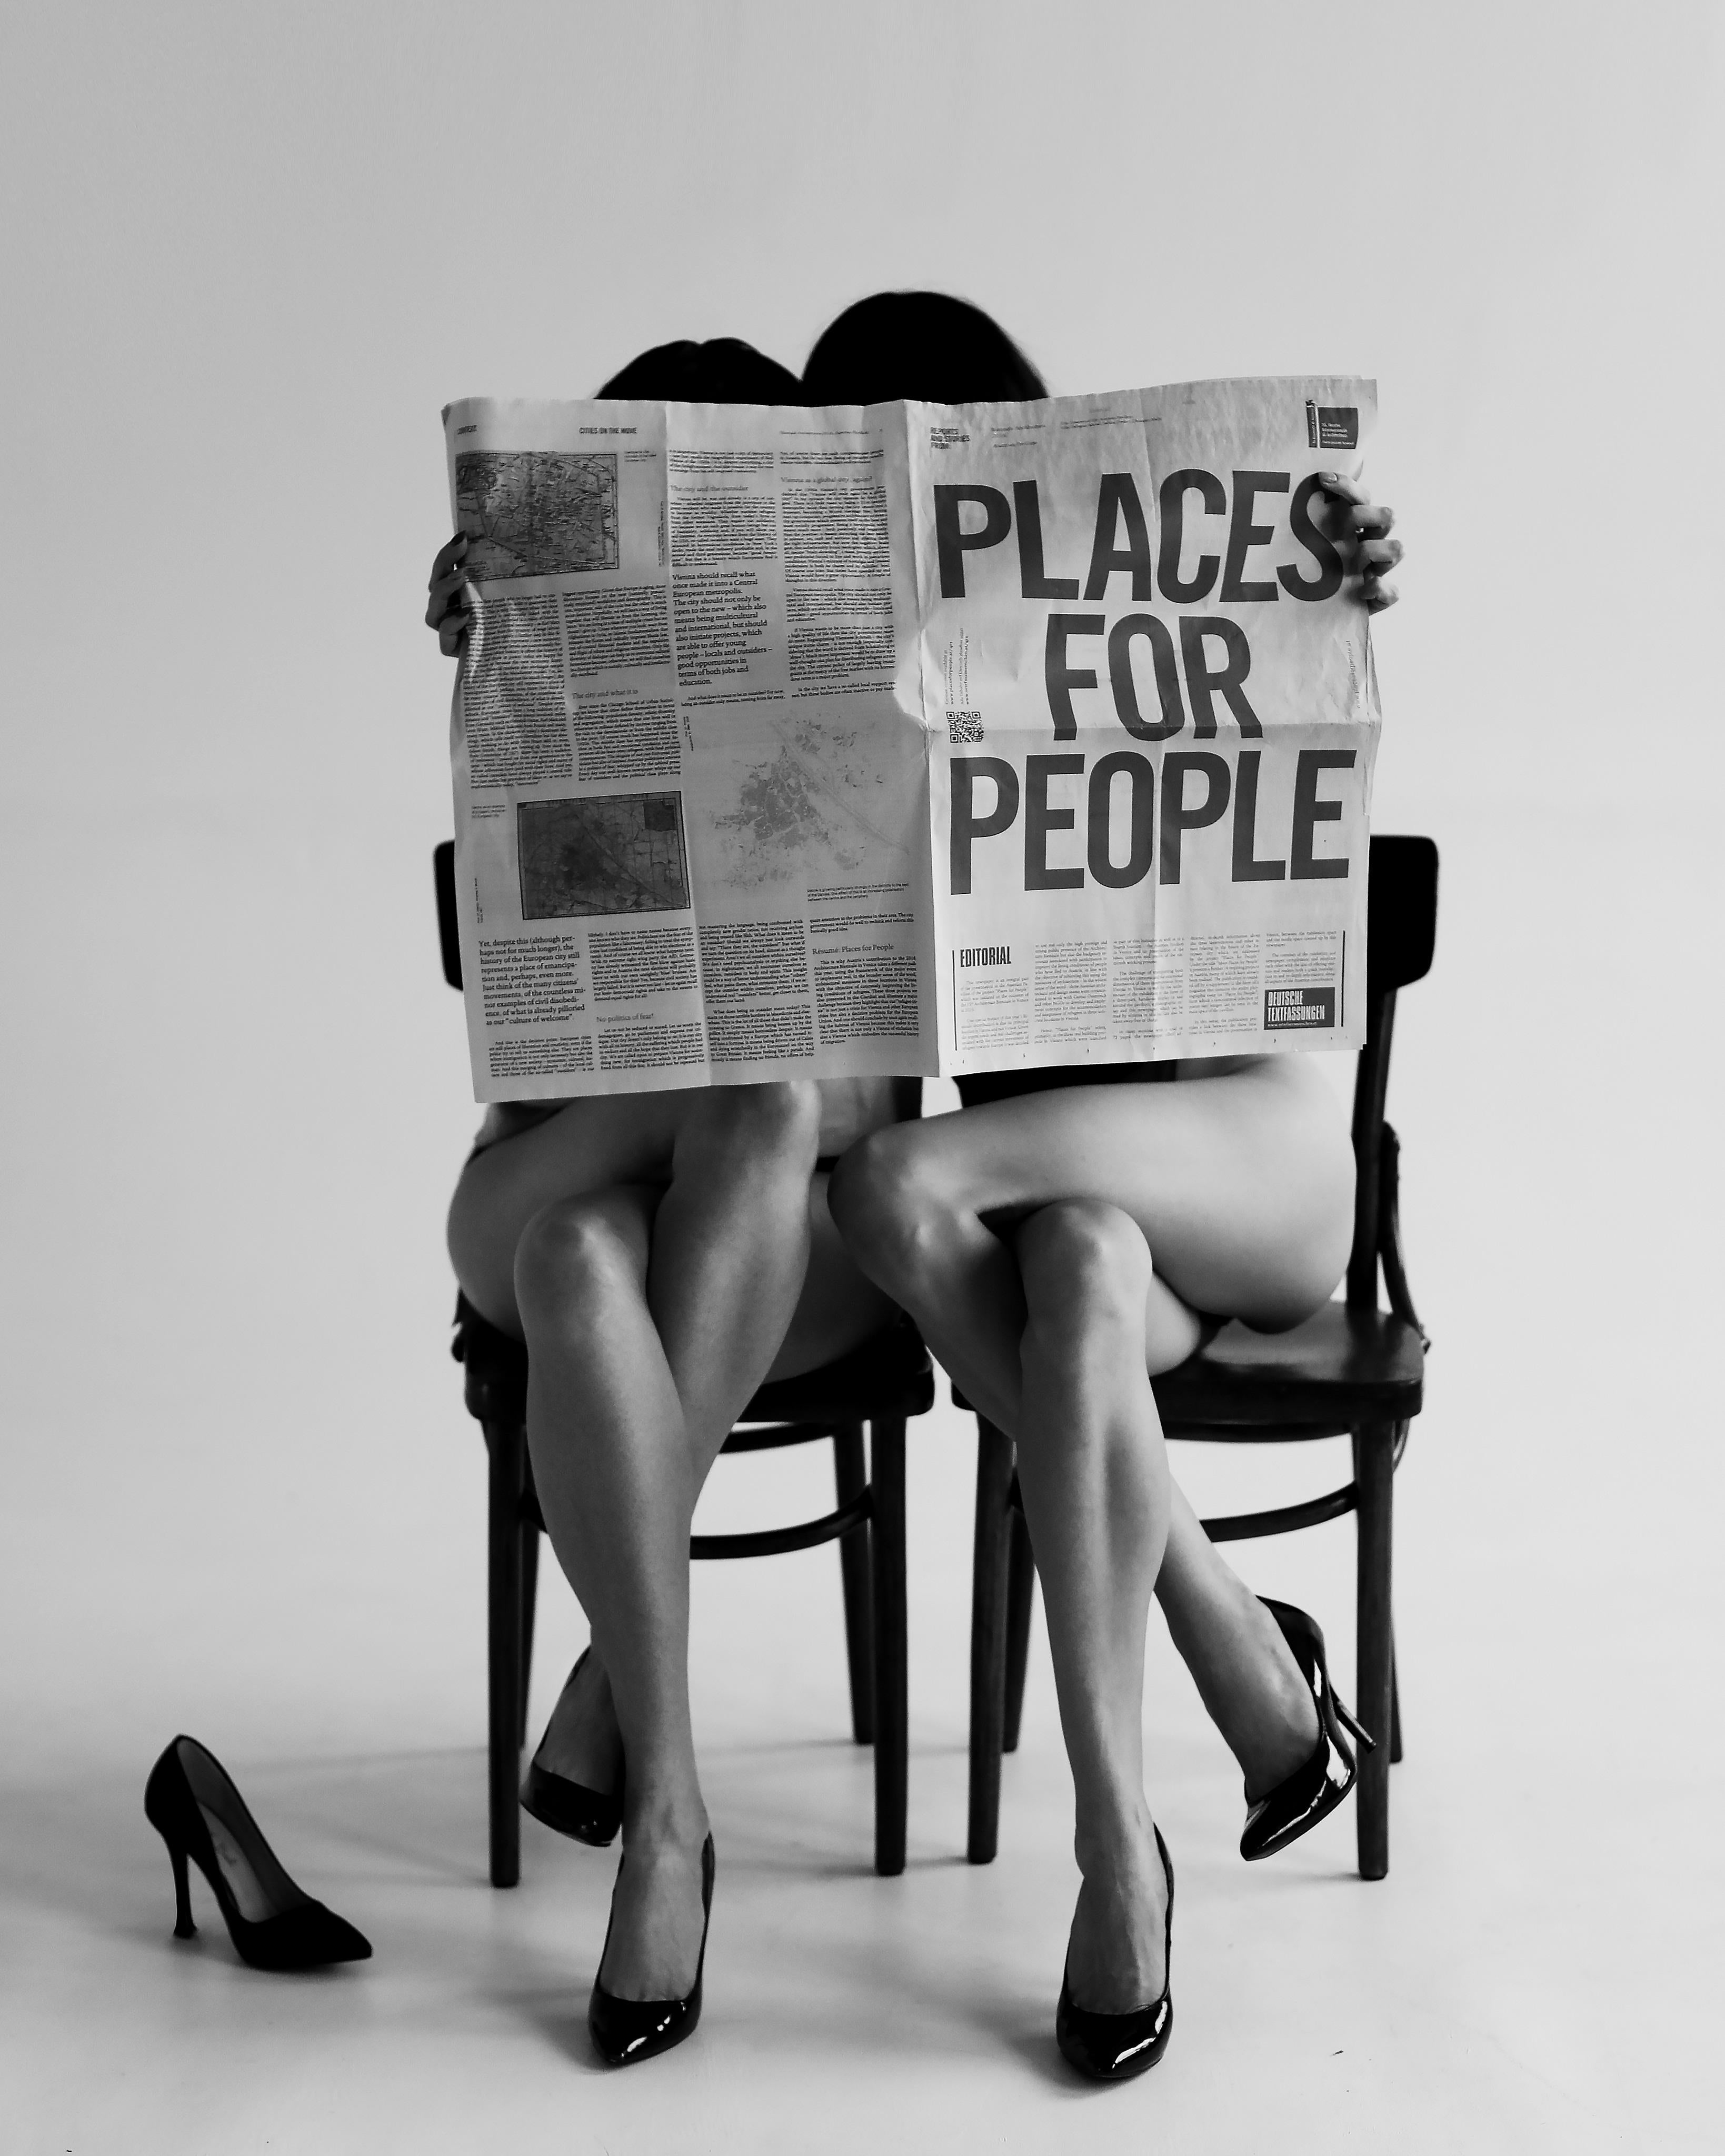 "Place for People" Photography 27.5" x 24" inch Edition 5/15 by Olha Stepanian

Printed on Epson Professional Paper
Signed and numbered by the artist 

Not framed. Ships in a tube. 


Olha Stepanian was born and raised in Ukraine, where she